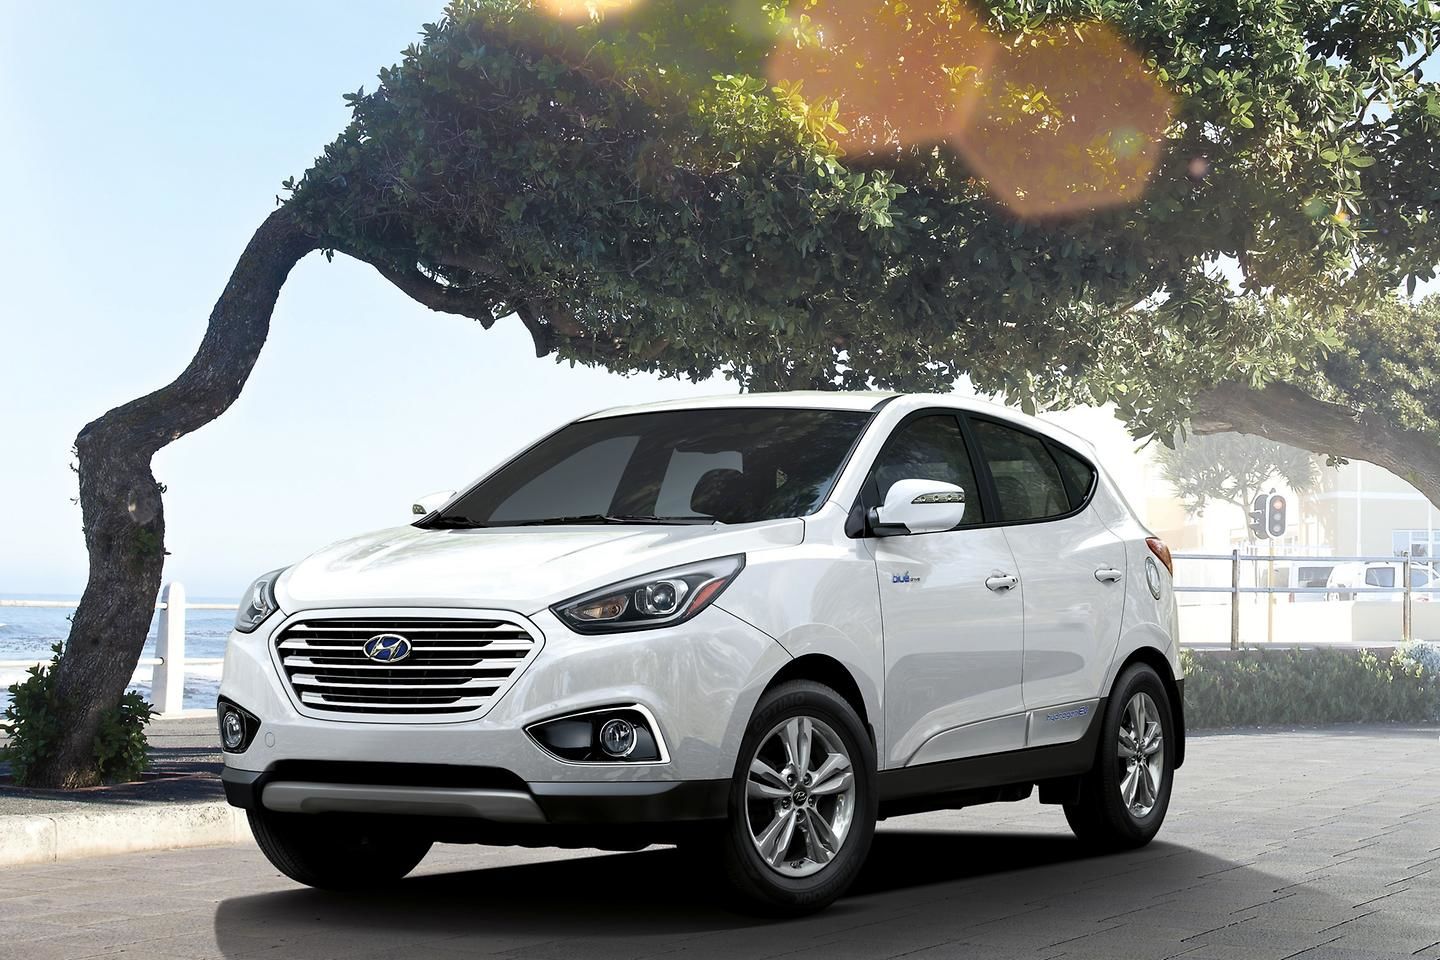 Hyundai and U.S. Department of Energy Extend Fuel Cell Vehicle Loan Partnership